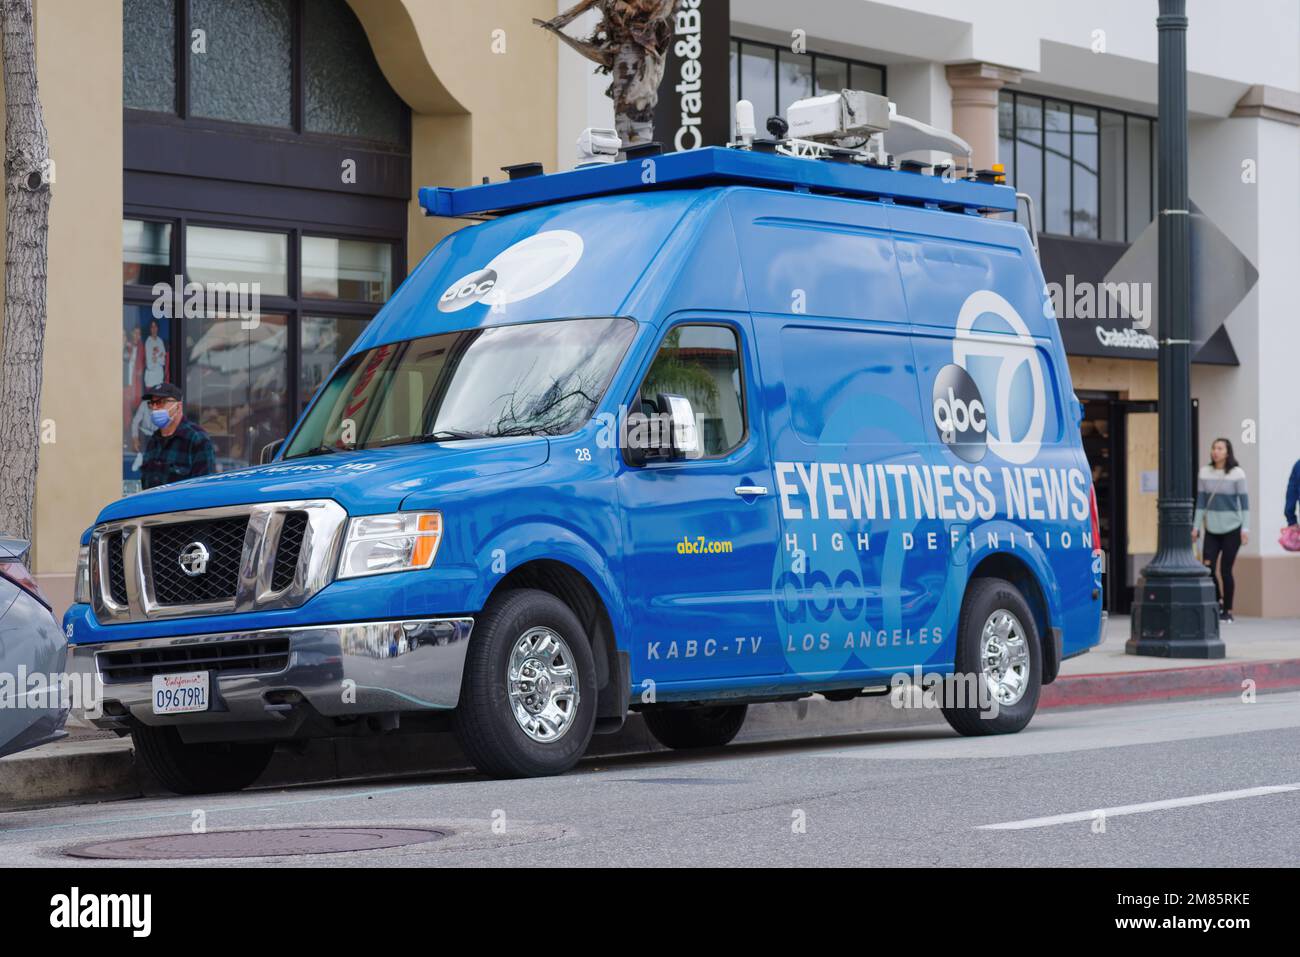 Pasadena, California, United States - January 1, 2023: abd 7 Eyewitness News van shown parked in the City of Pasadena in Los Angeles County. Stock Photo